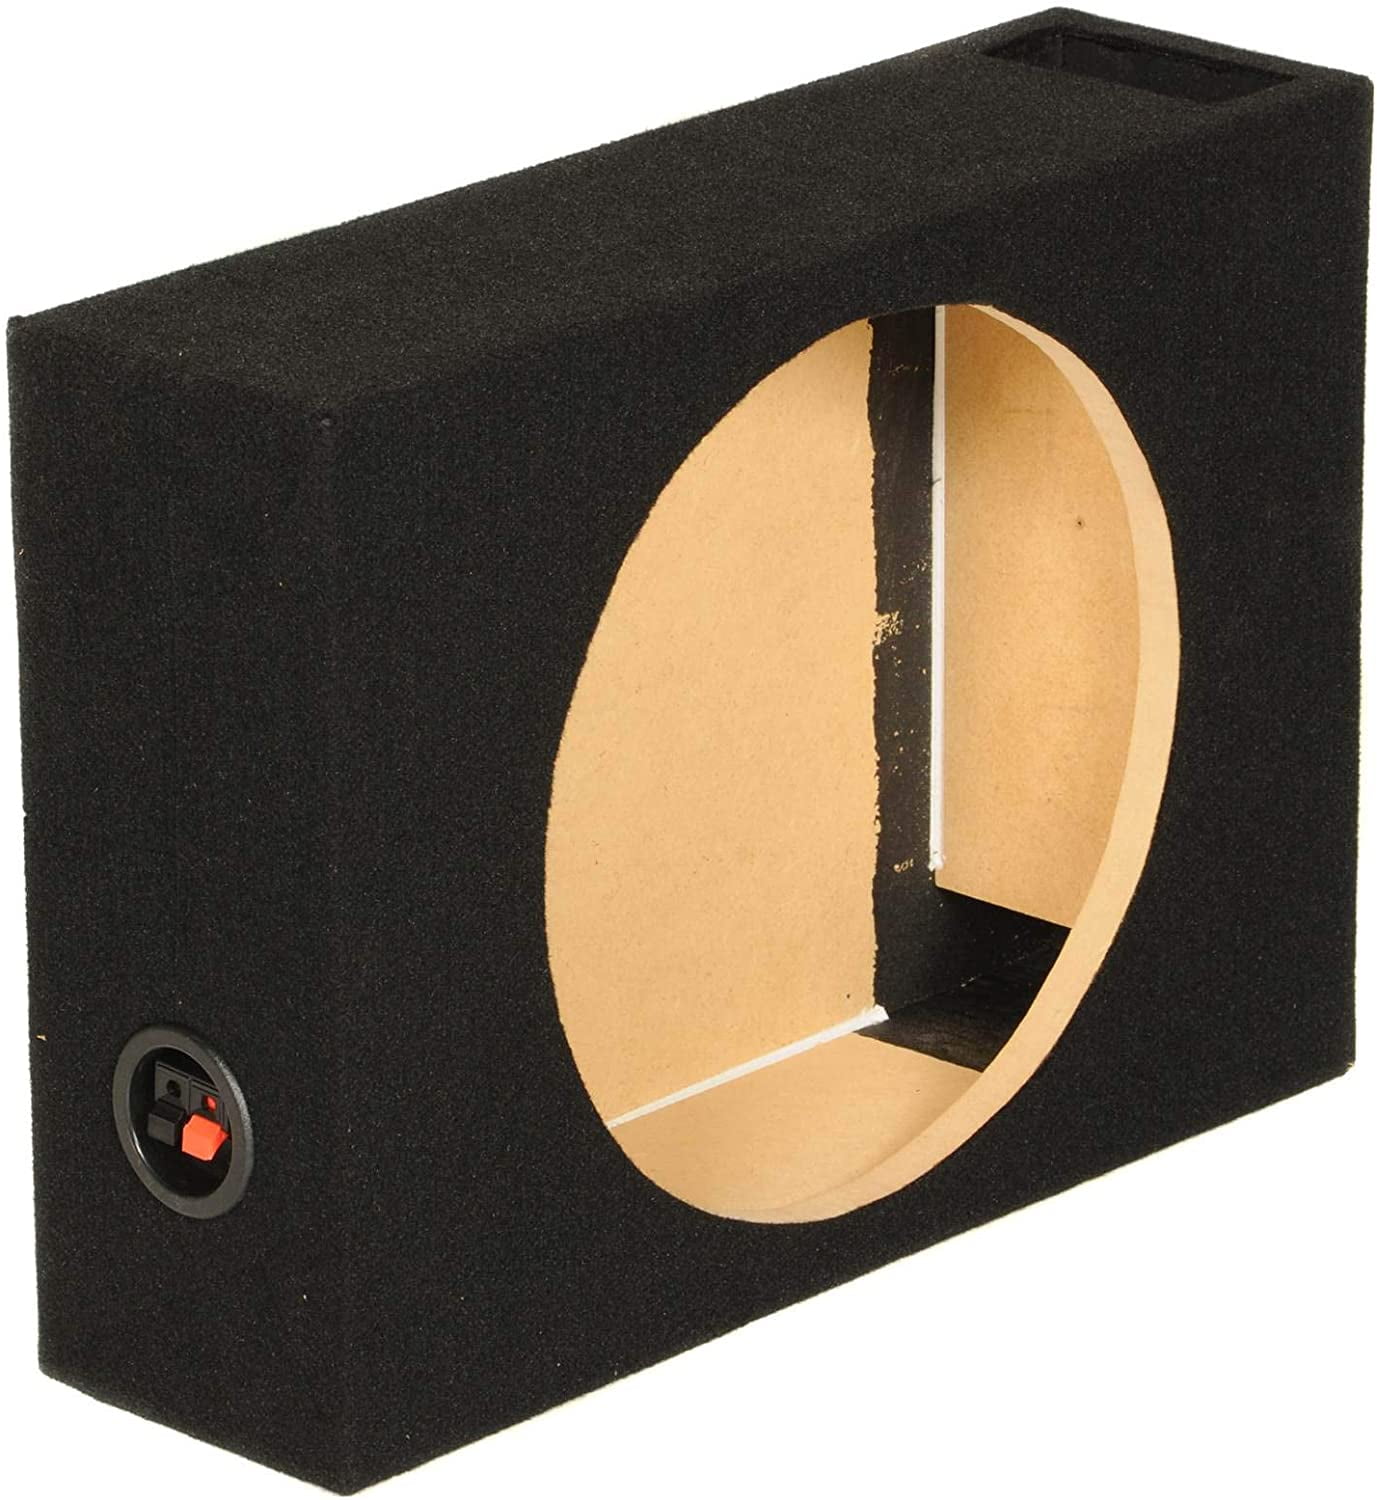 Qpower QSHALLOW112V Single 12" Shallow Vented Woofer Box 